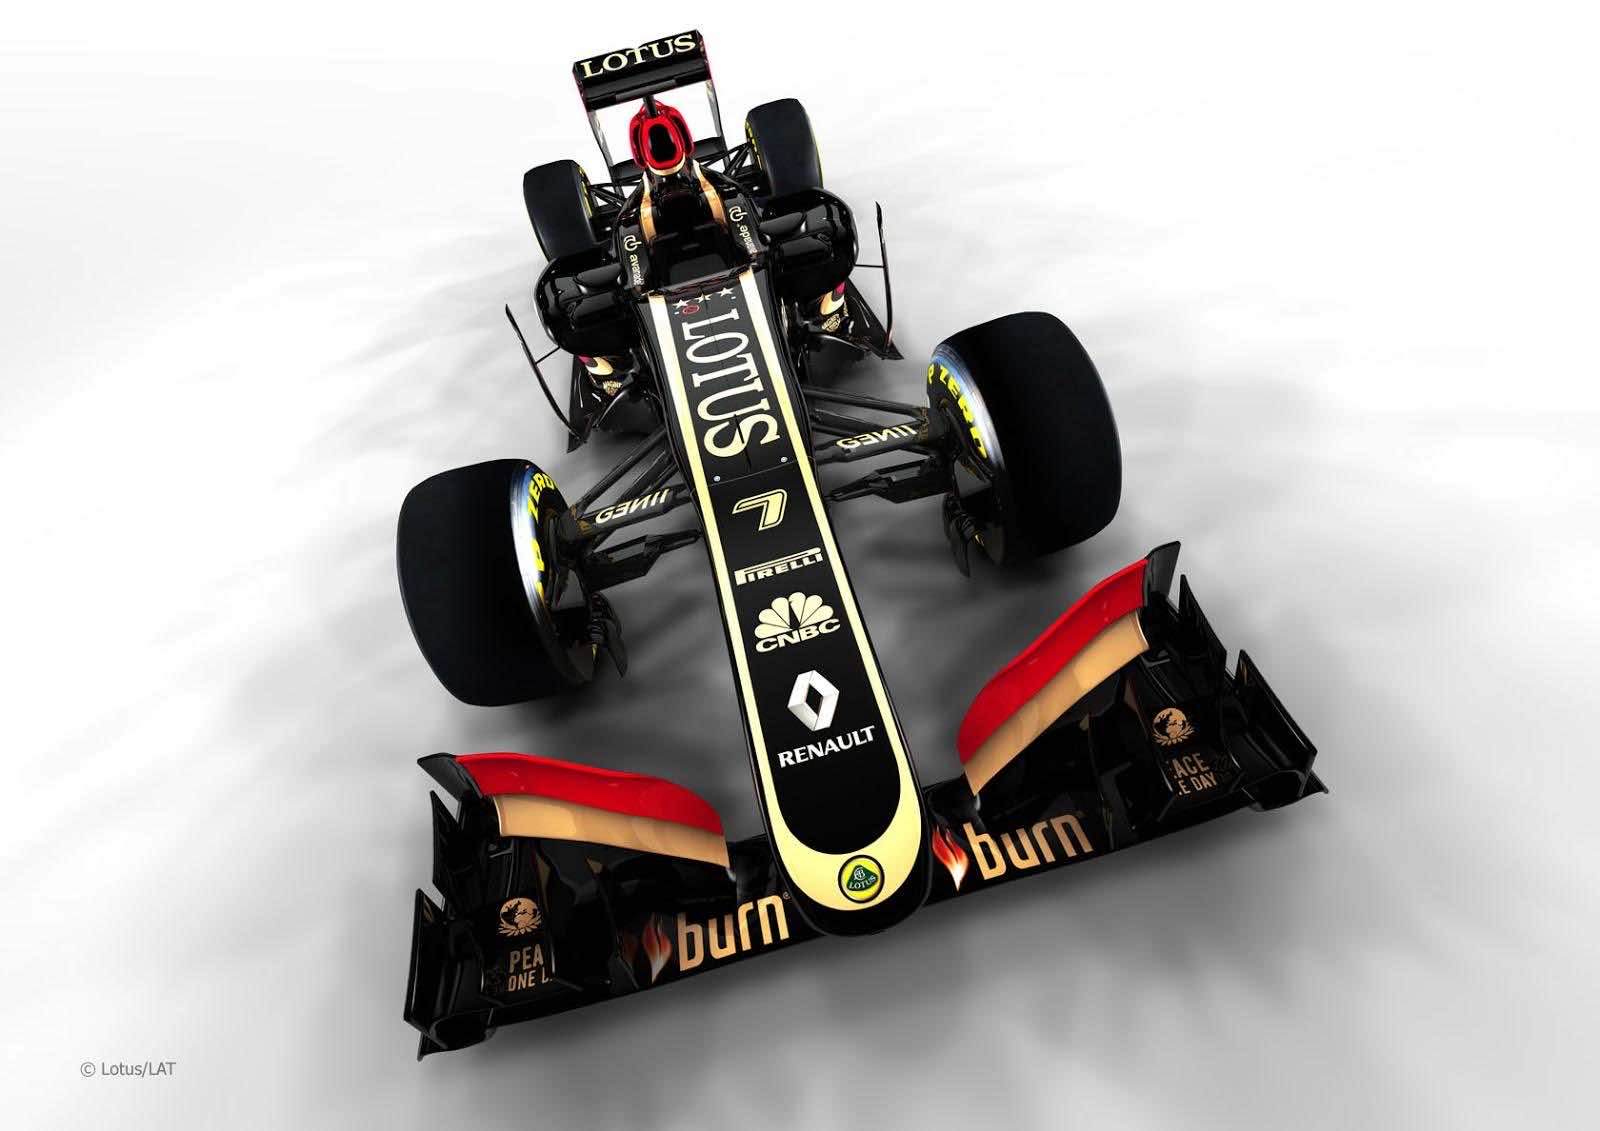 Over 50 Formula One Cars F1 Wallpapers in HD For Free Download